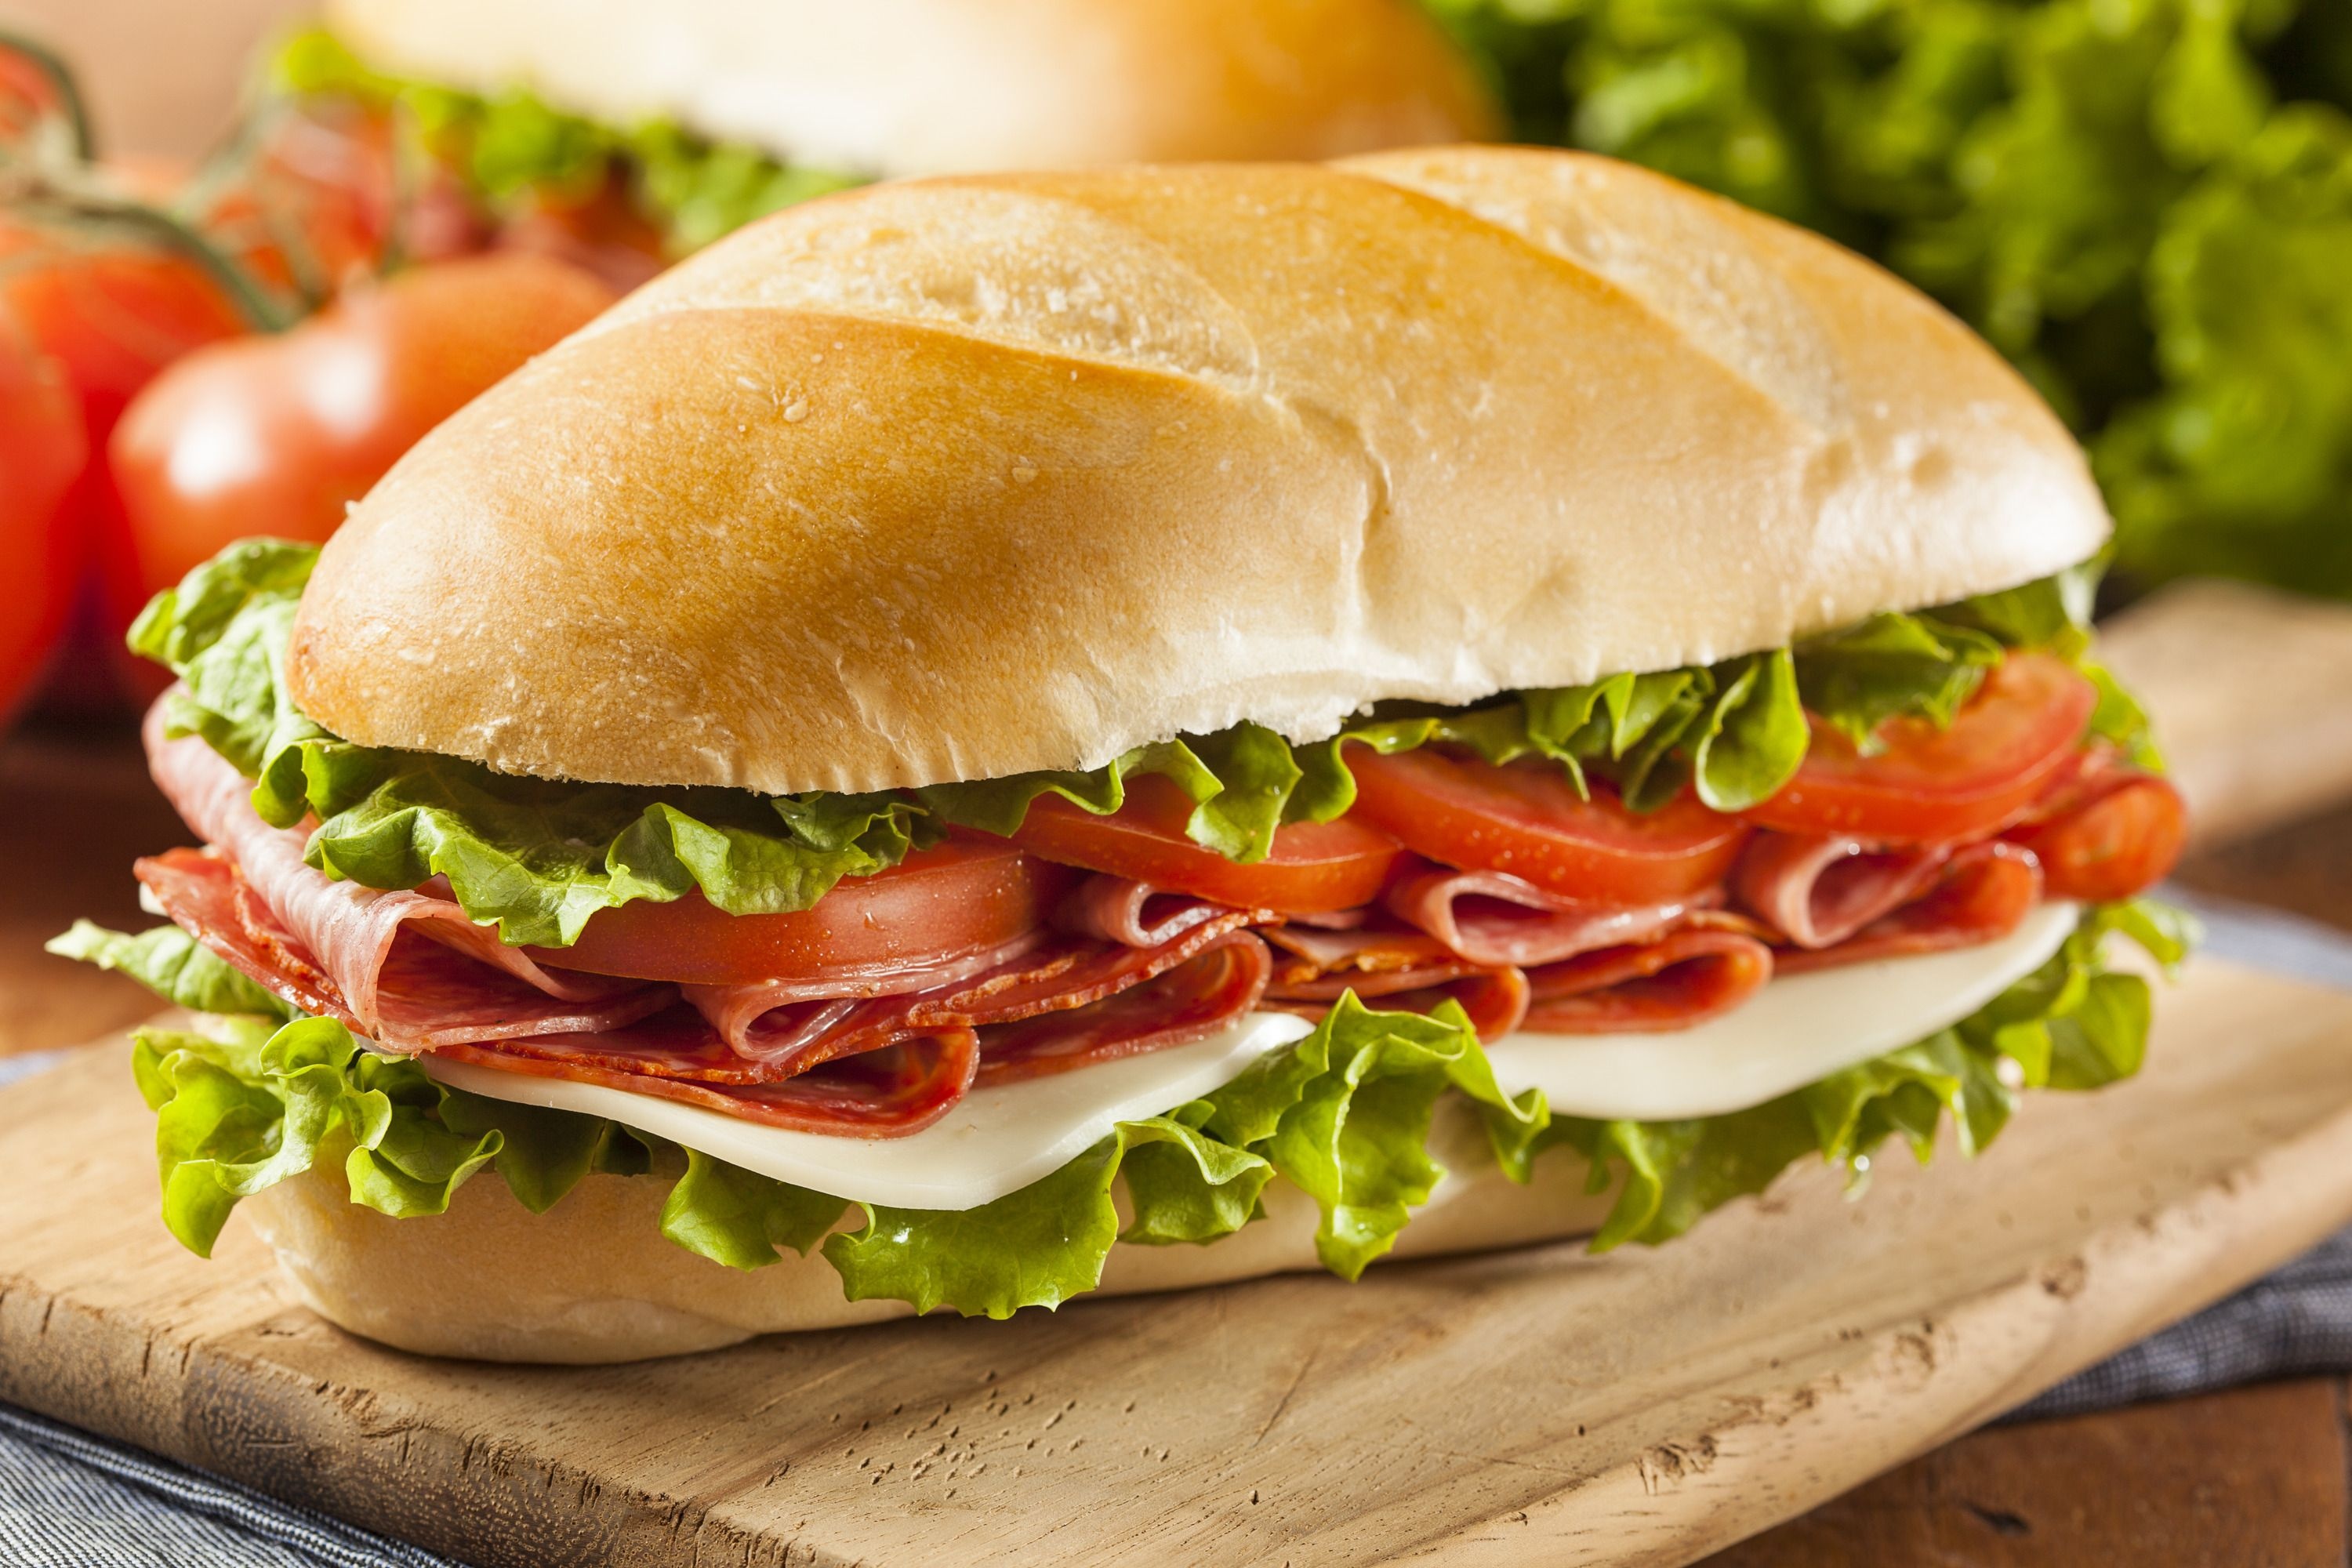 Sandwich: Taken to work, school, or picnics to be eaten as part of a packed lunch. 3000x2000 HD Background.